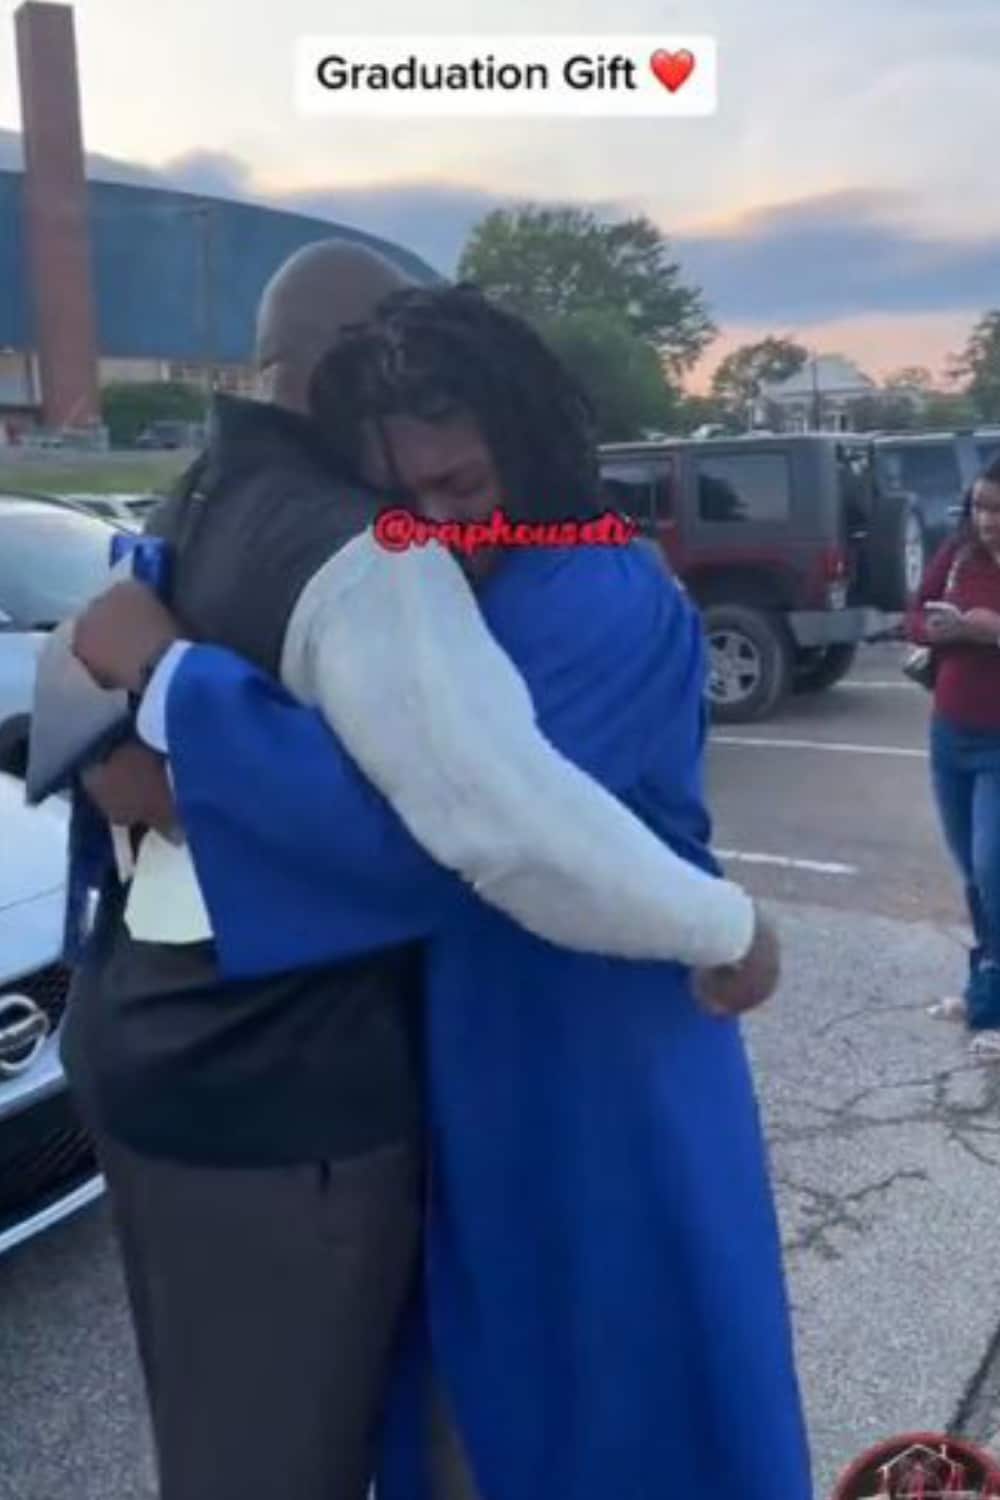 Moment tears well up in young man's eyes as his father surprises him with a car on graduation day (Video)